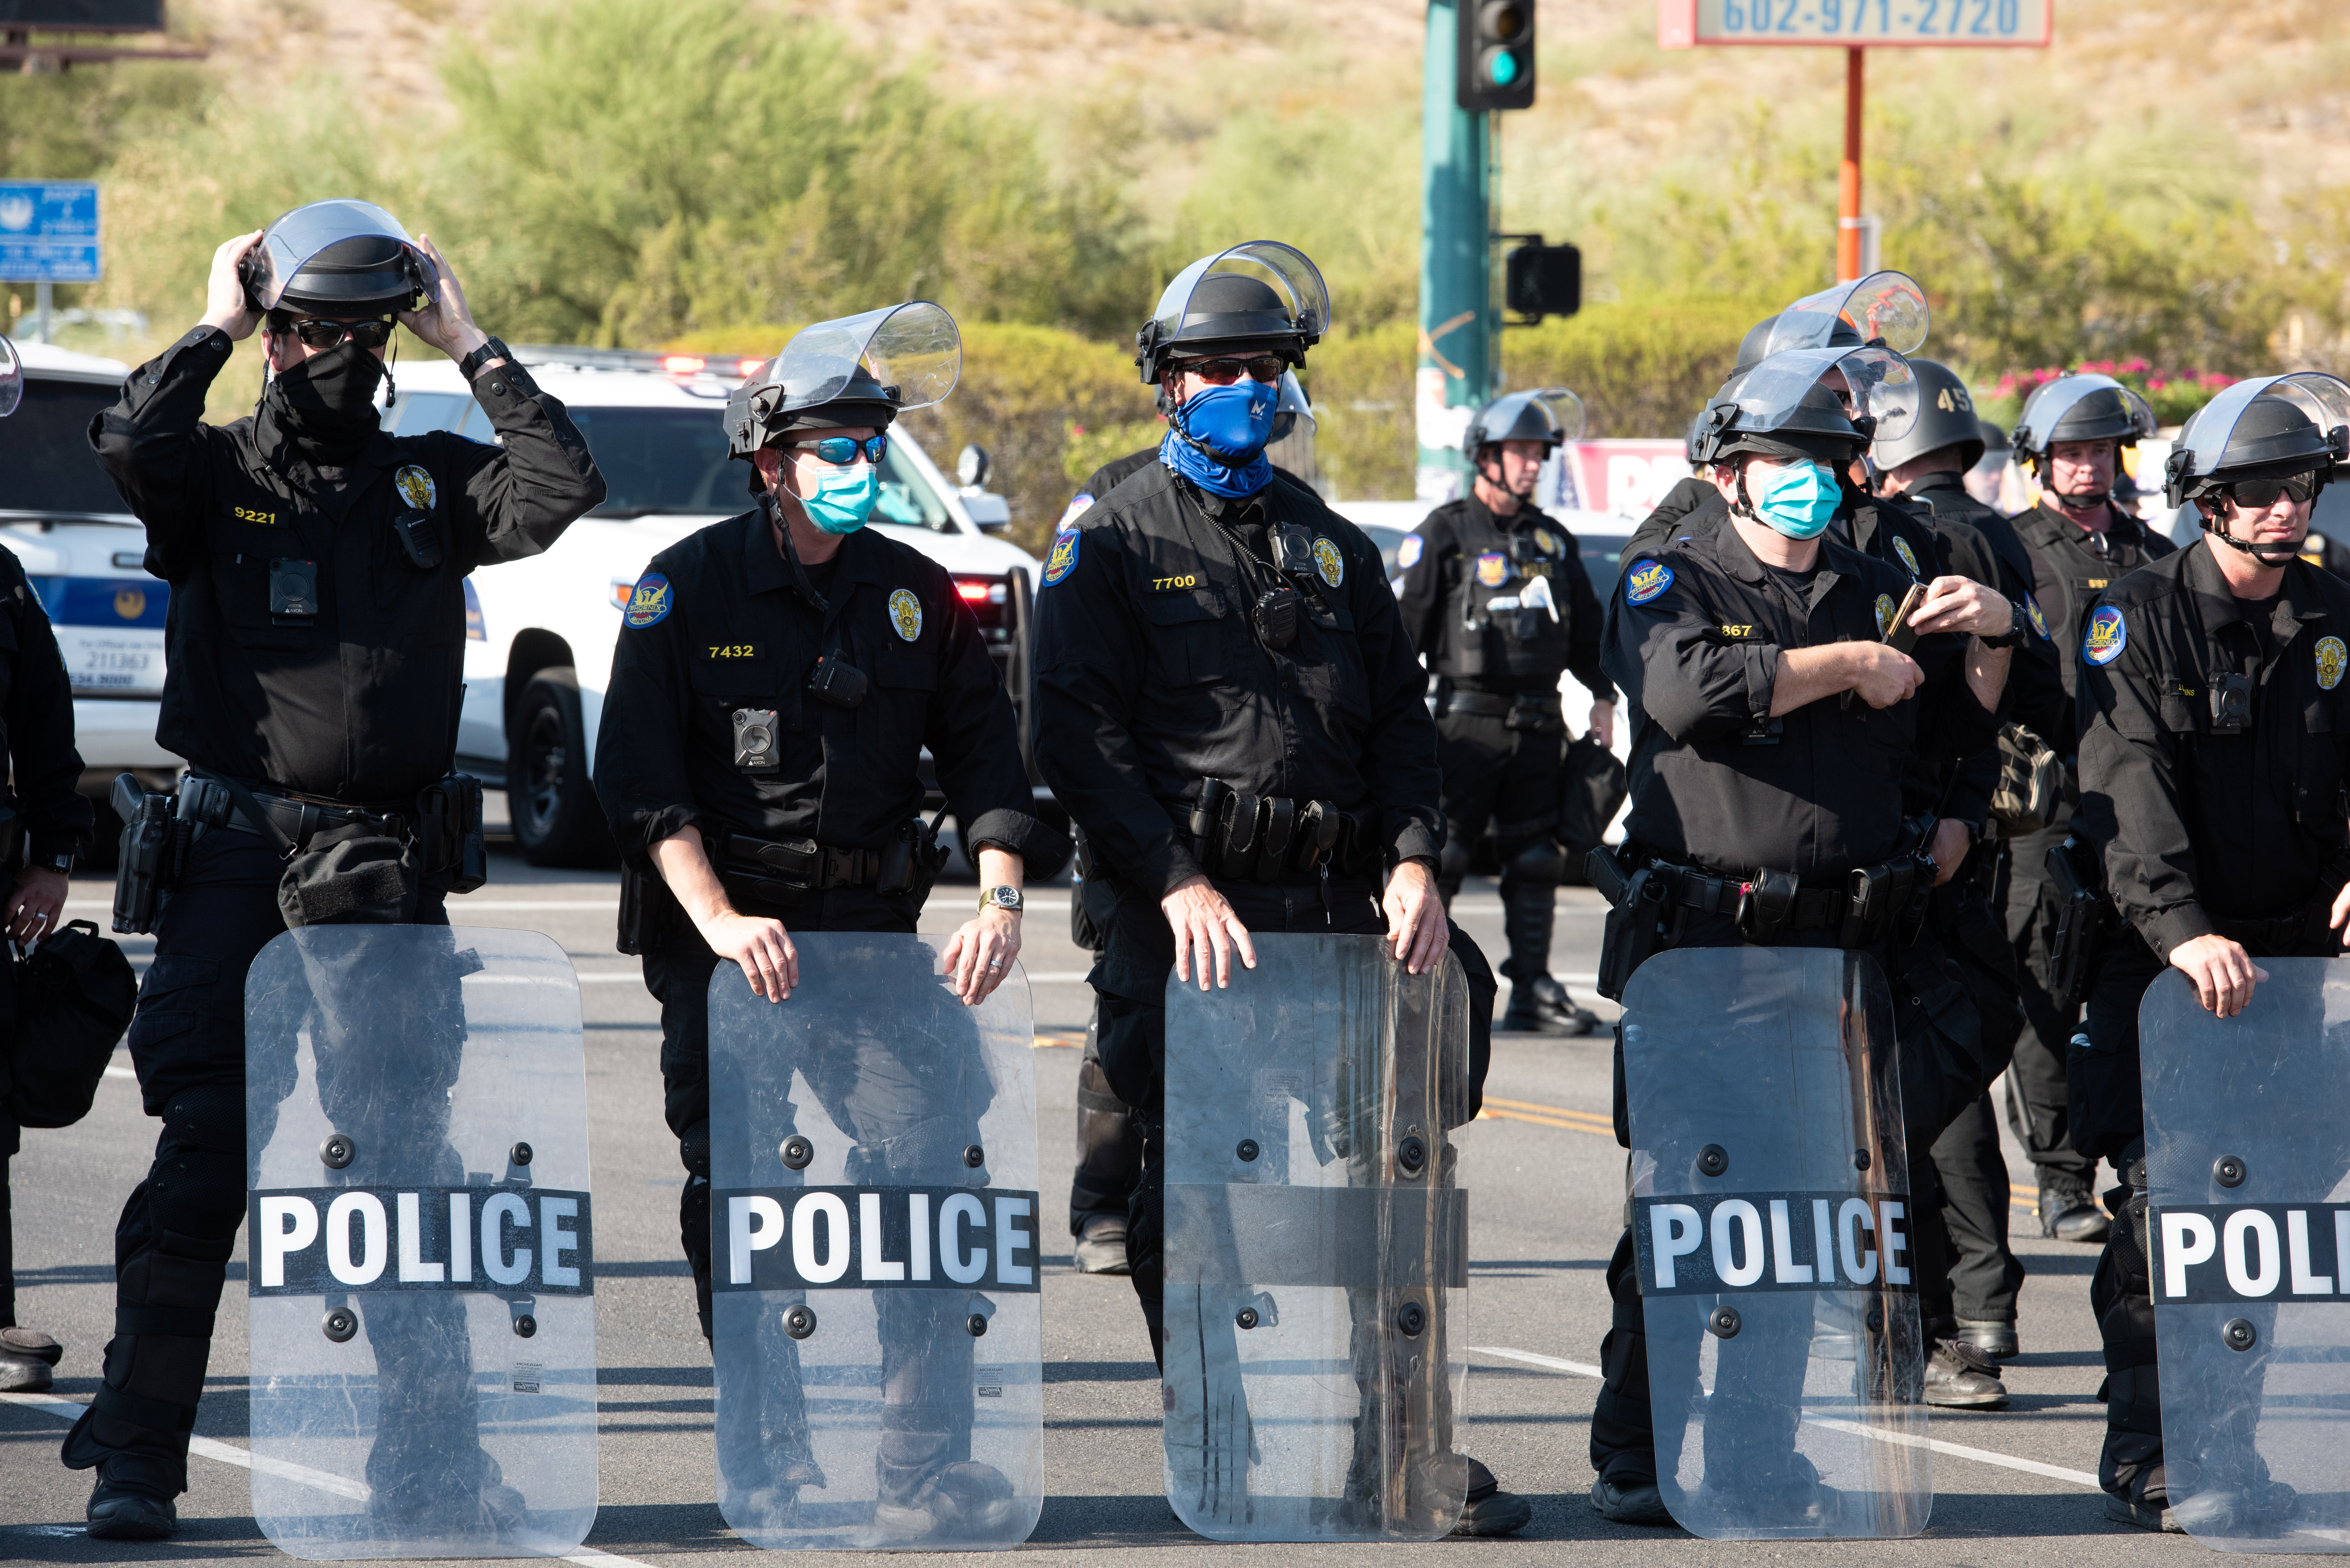 Police block protesters during a visit by U.S, President Donald Trump to the Dream City Church in Phoenix